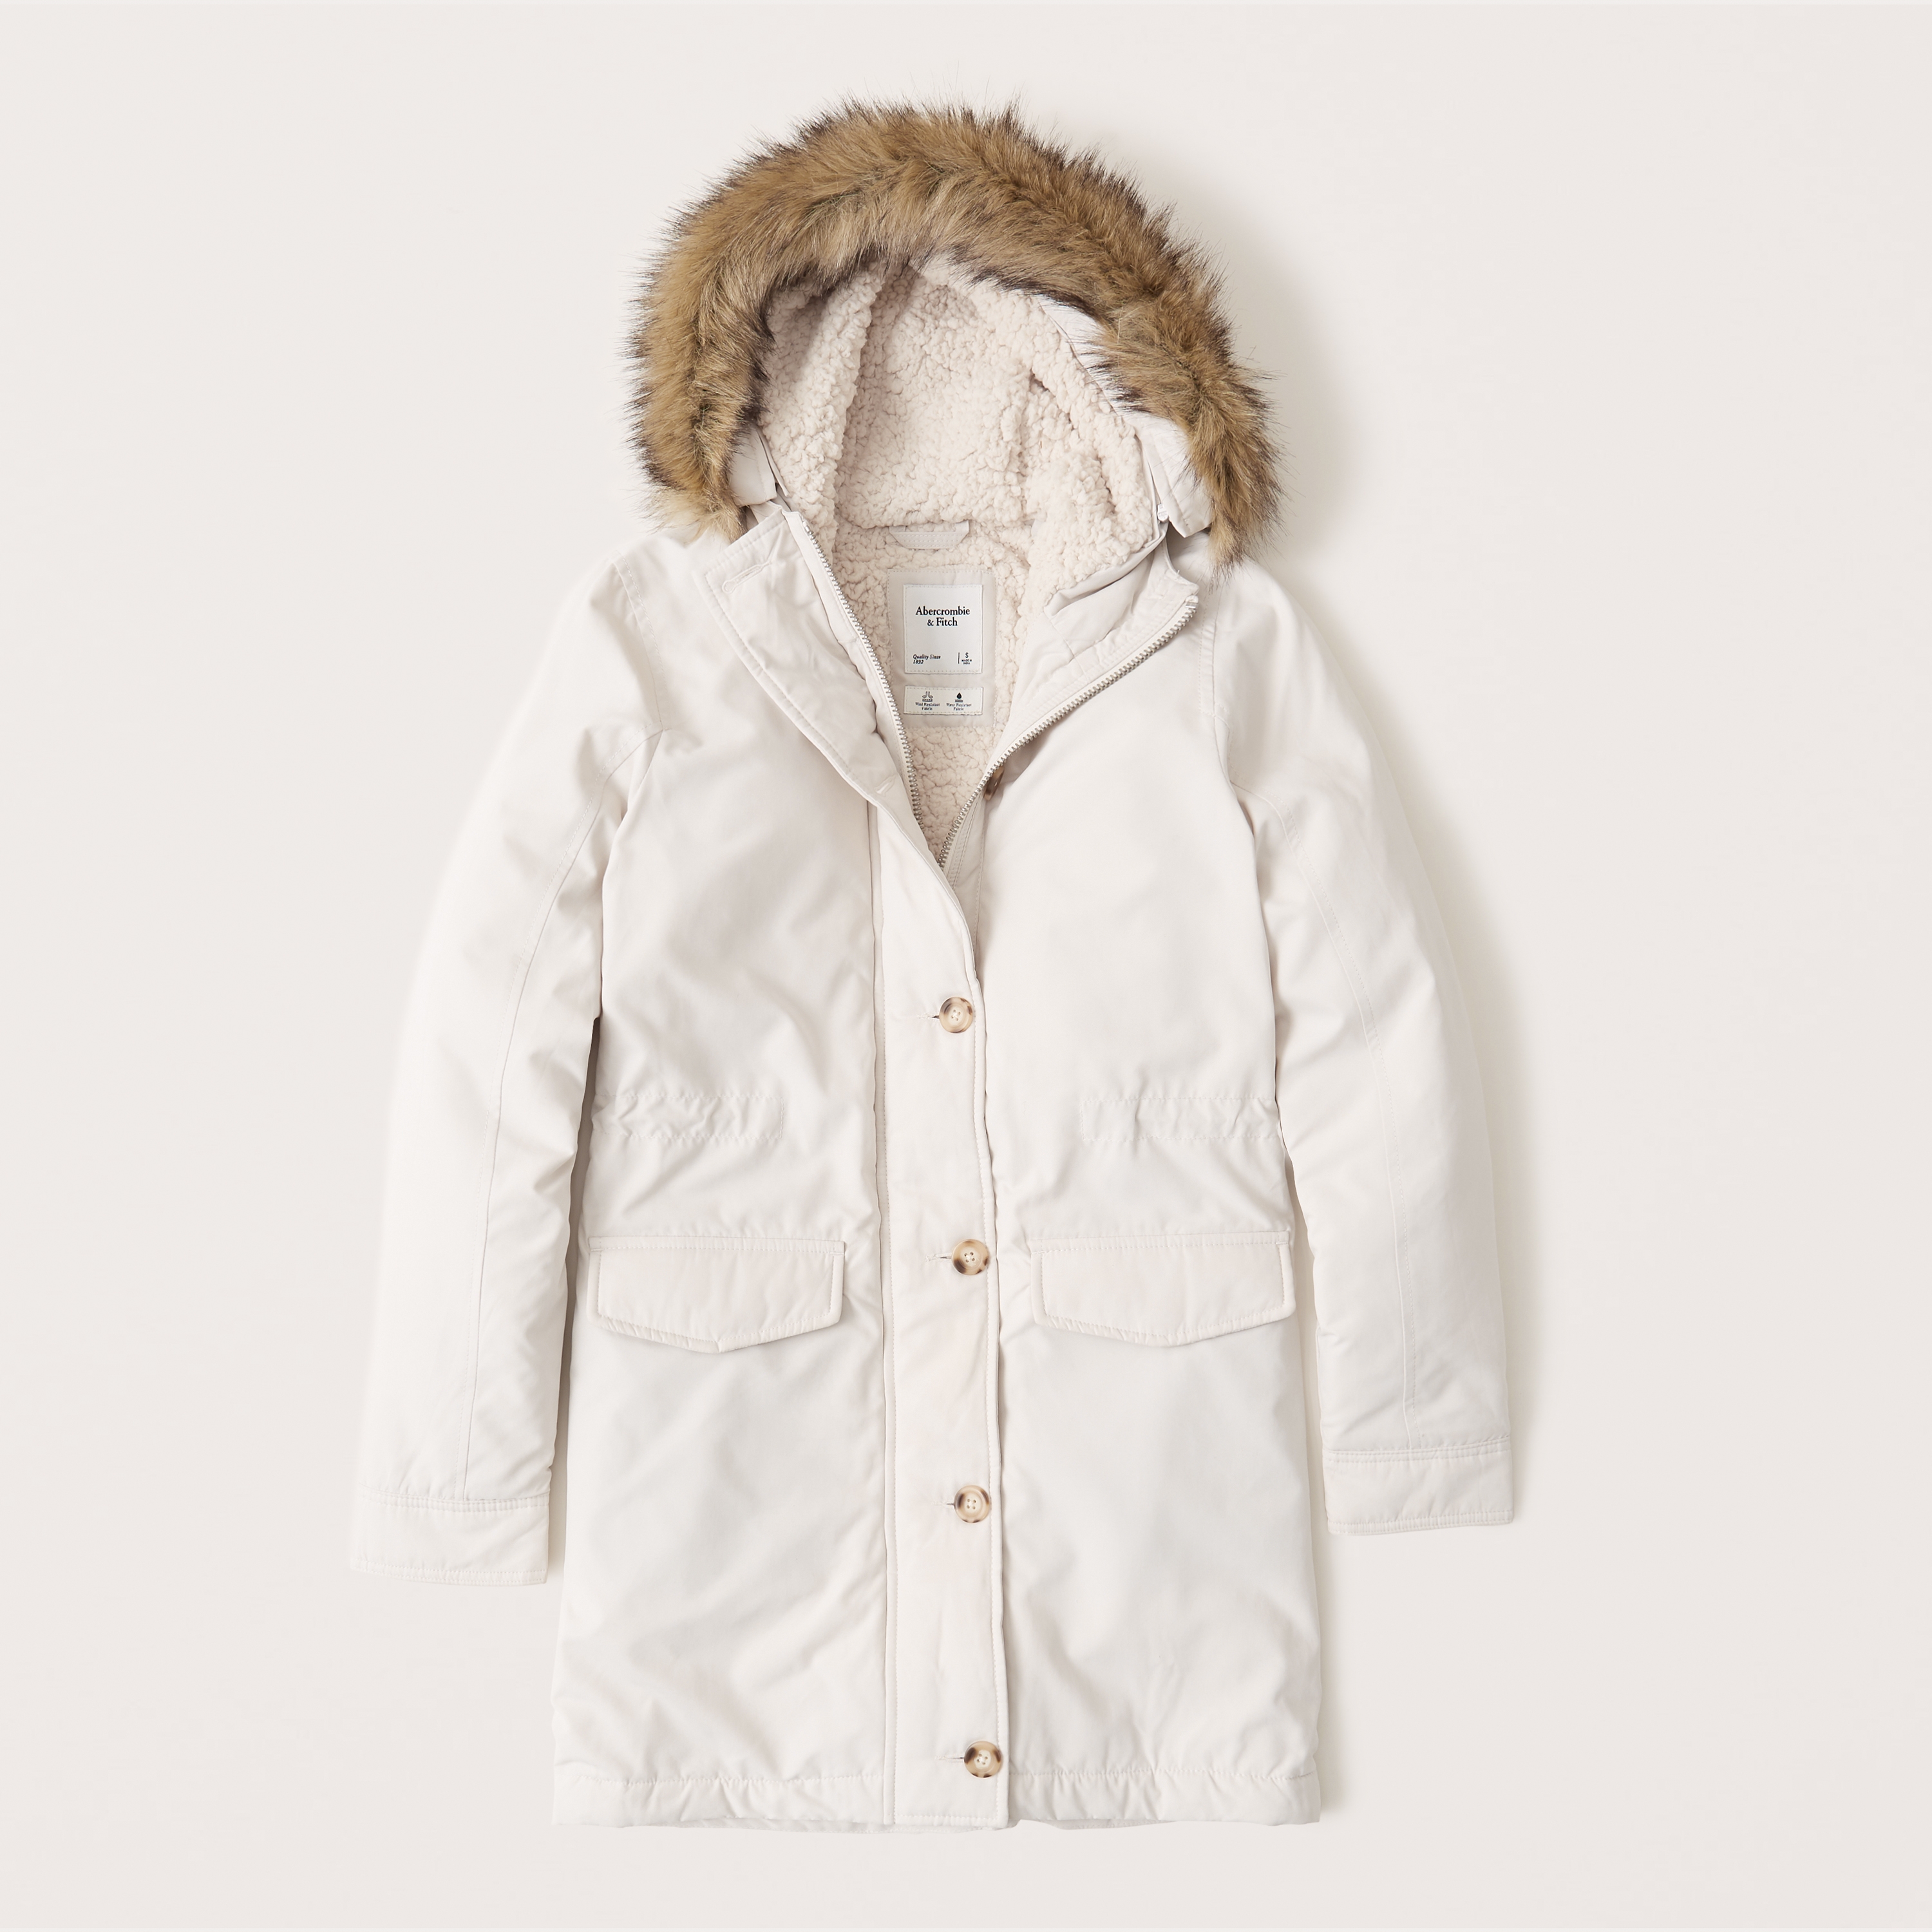 sherpa lined military parka abercrombie